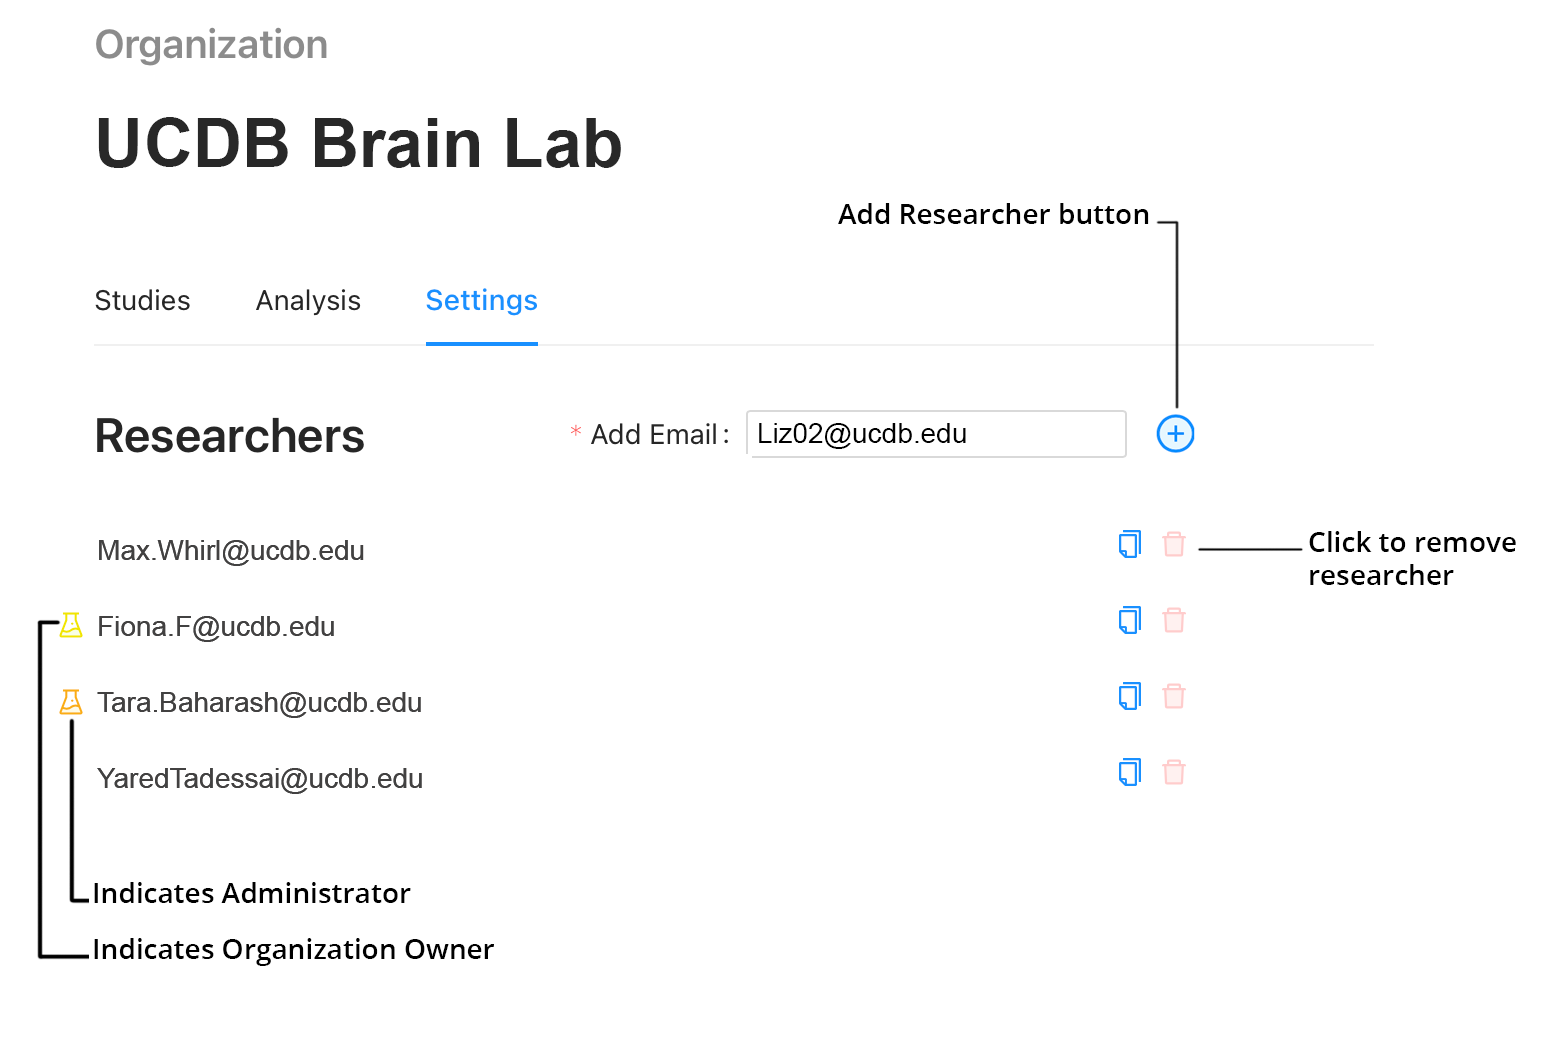 Image: Settings tab of Organization page in Researcher Portal.